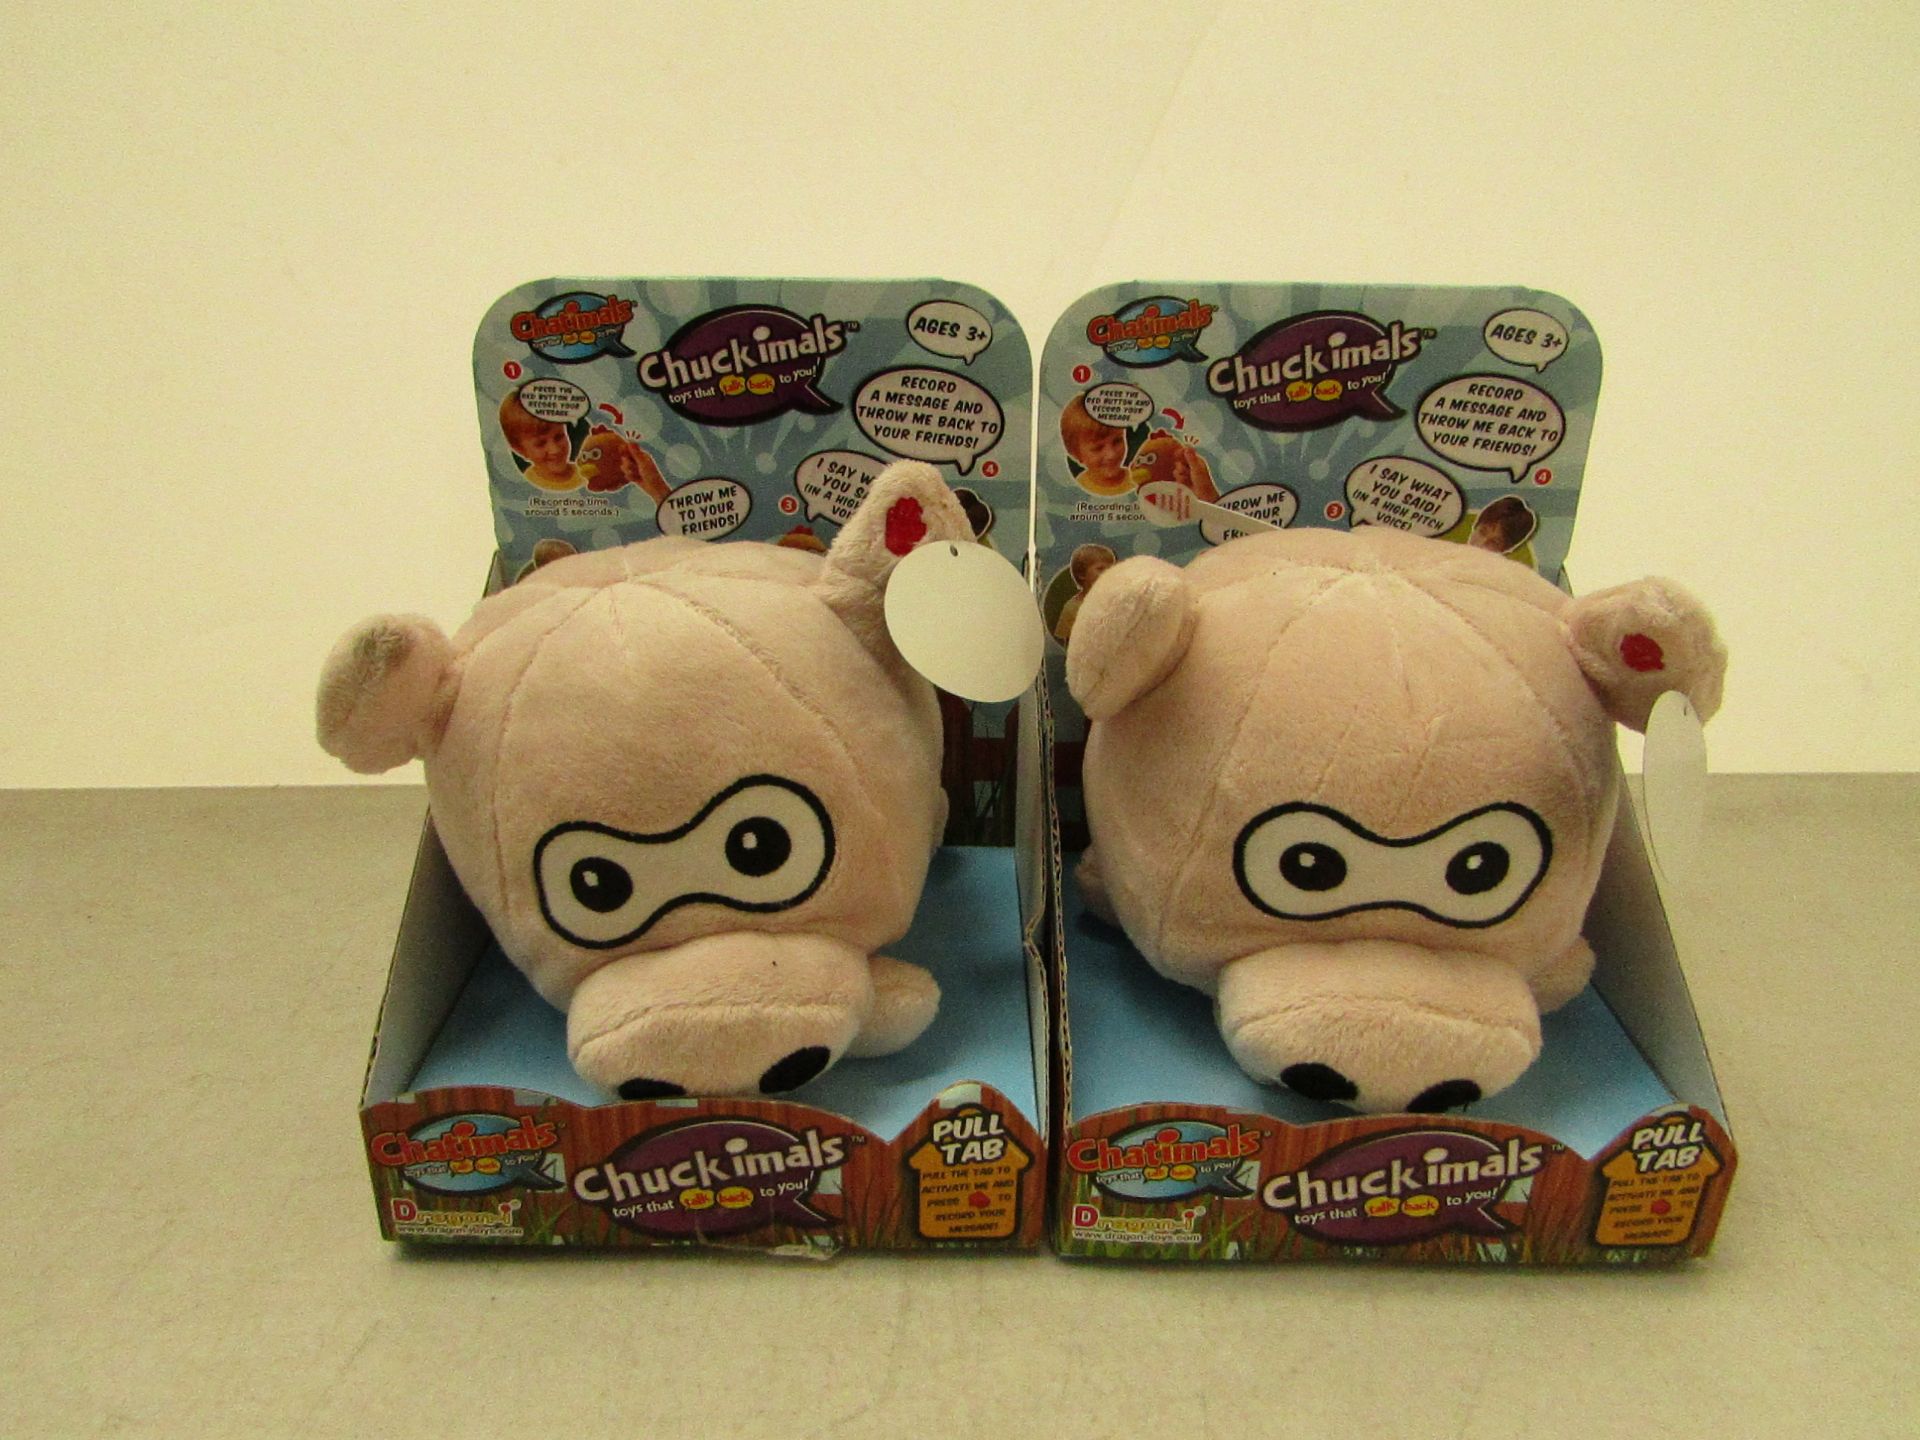 2x Chuckimals pig design, both new and in packaging.